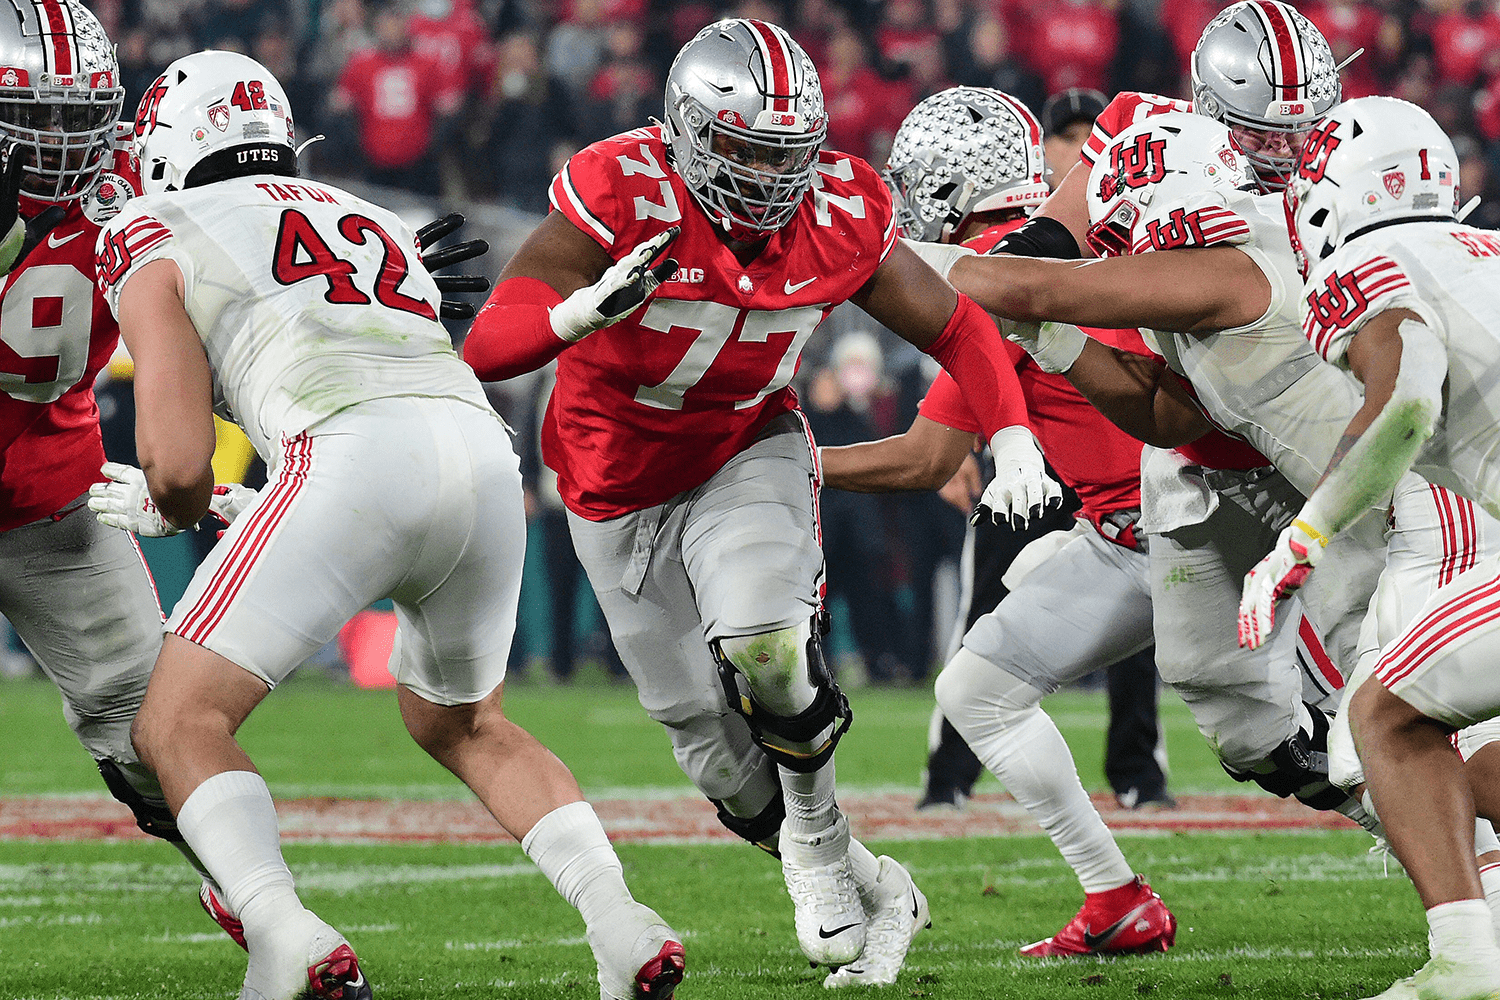 2023 NFL Draft: Assessing the top Offensive Linemen with advanced data